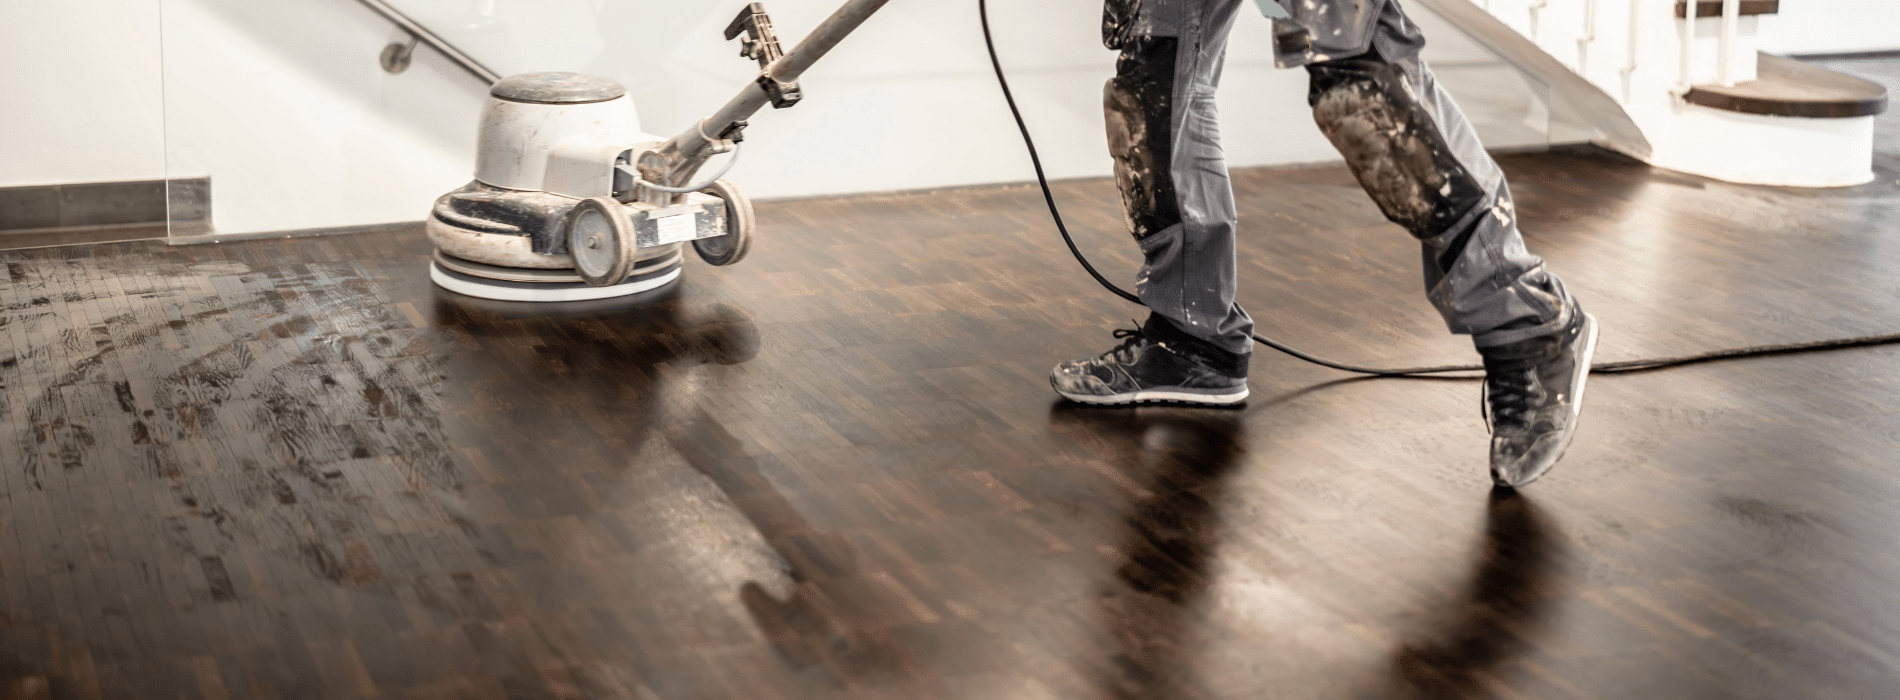 In Finsbury Park, N4, Witness the expertise of Mr Sander® as they skillfully sand a herringbone floor using the powerful Dimension d407mm Bona belt sander. With an impressive 1500 effect, operating at 230V and a frequency of 50/60 Hz, this professional-grade equipment ensures a clean and efficient result.